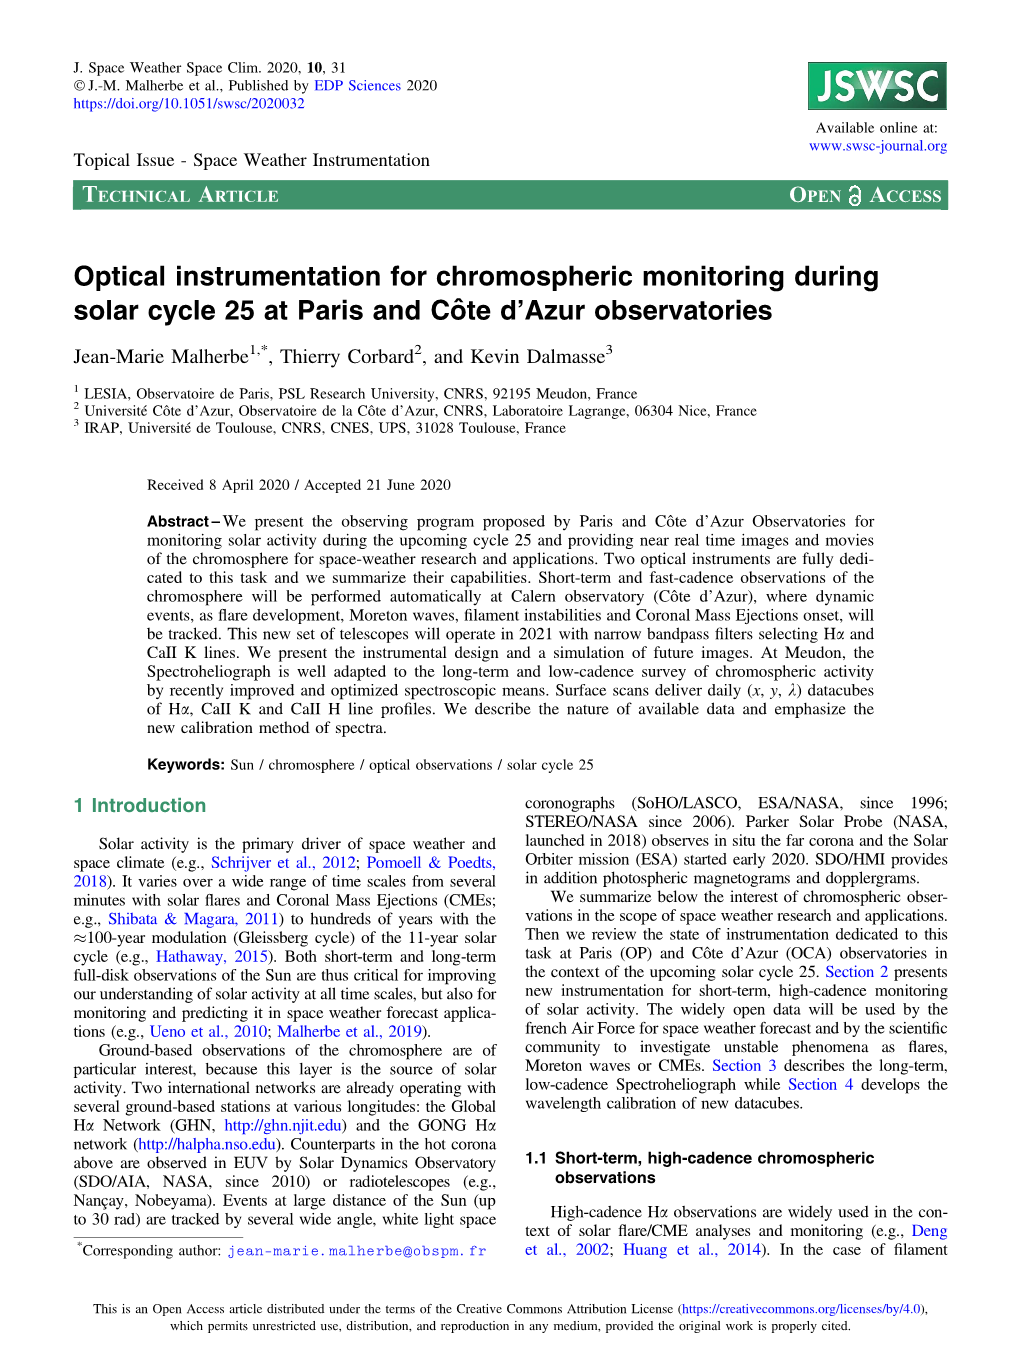 Optical Instrumentation for Chromospheric Monitoring During Solar Cycle 25 at Paris and Cфte D'azur Observatories